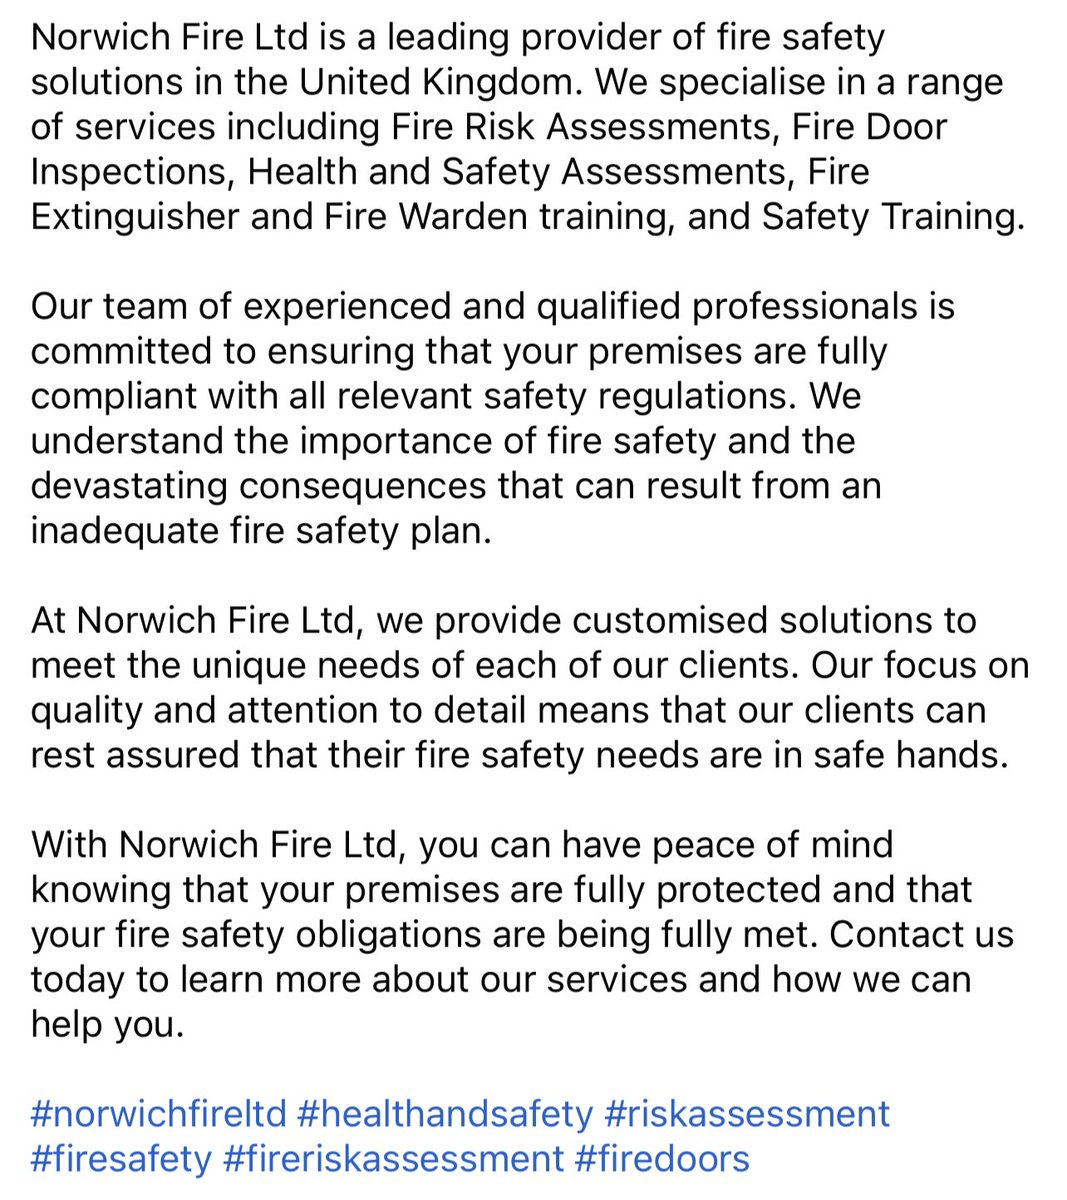 At Norwich Fire Ltd we specialise in a range of services including Fire Risk Assessments, Fire Door Inspections, Health and Safety Assessments, Fire Extinguisher and Fire Warden training, and Safety Training.
#norwichfireltd #healthandsafety #riskassessment #fireriskassessment